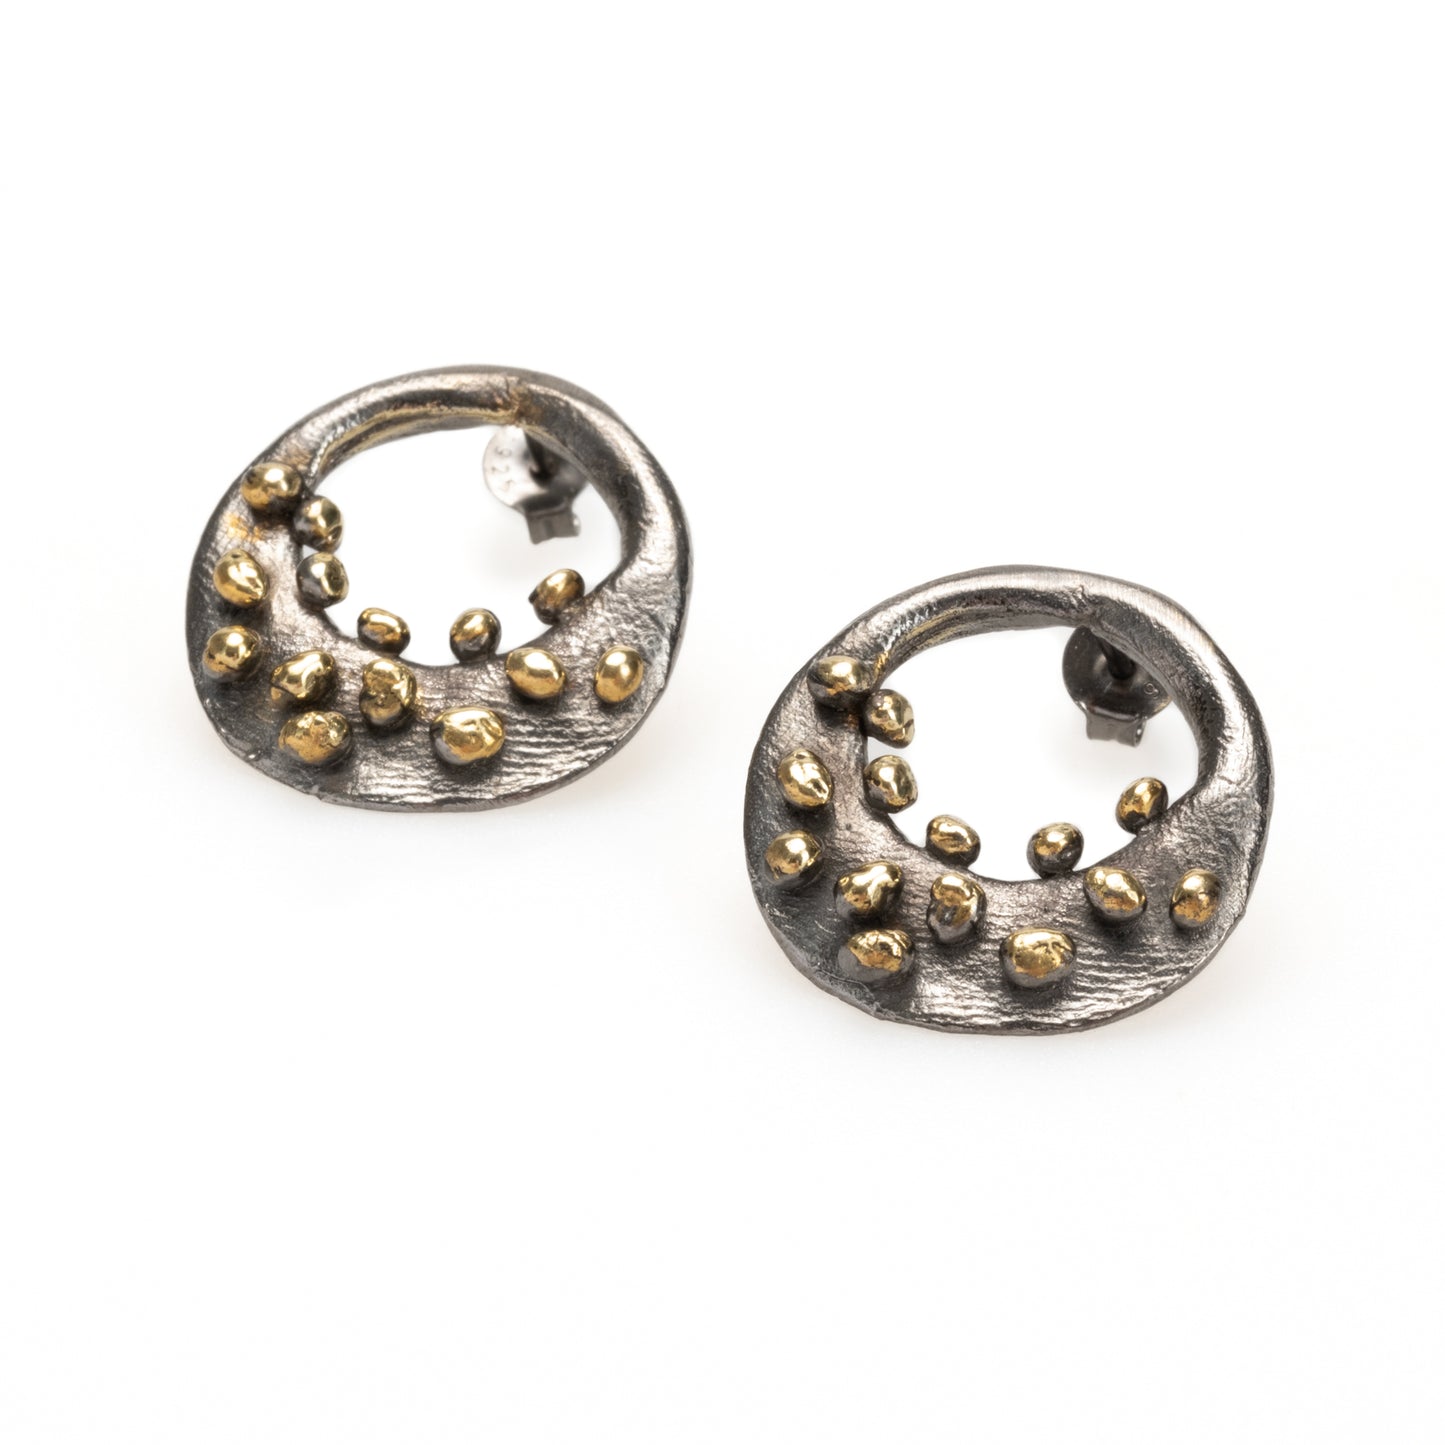 Golden Orbs Earrings with 18k Gold and Rhodium